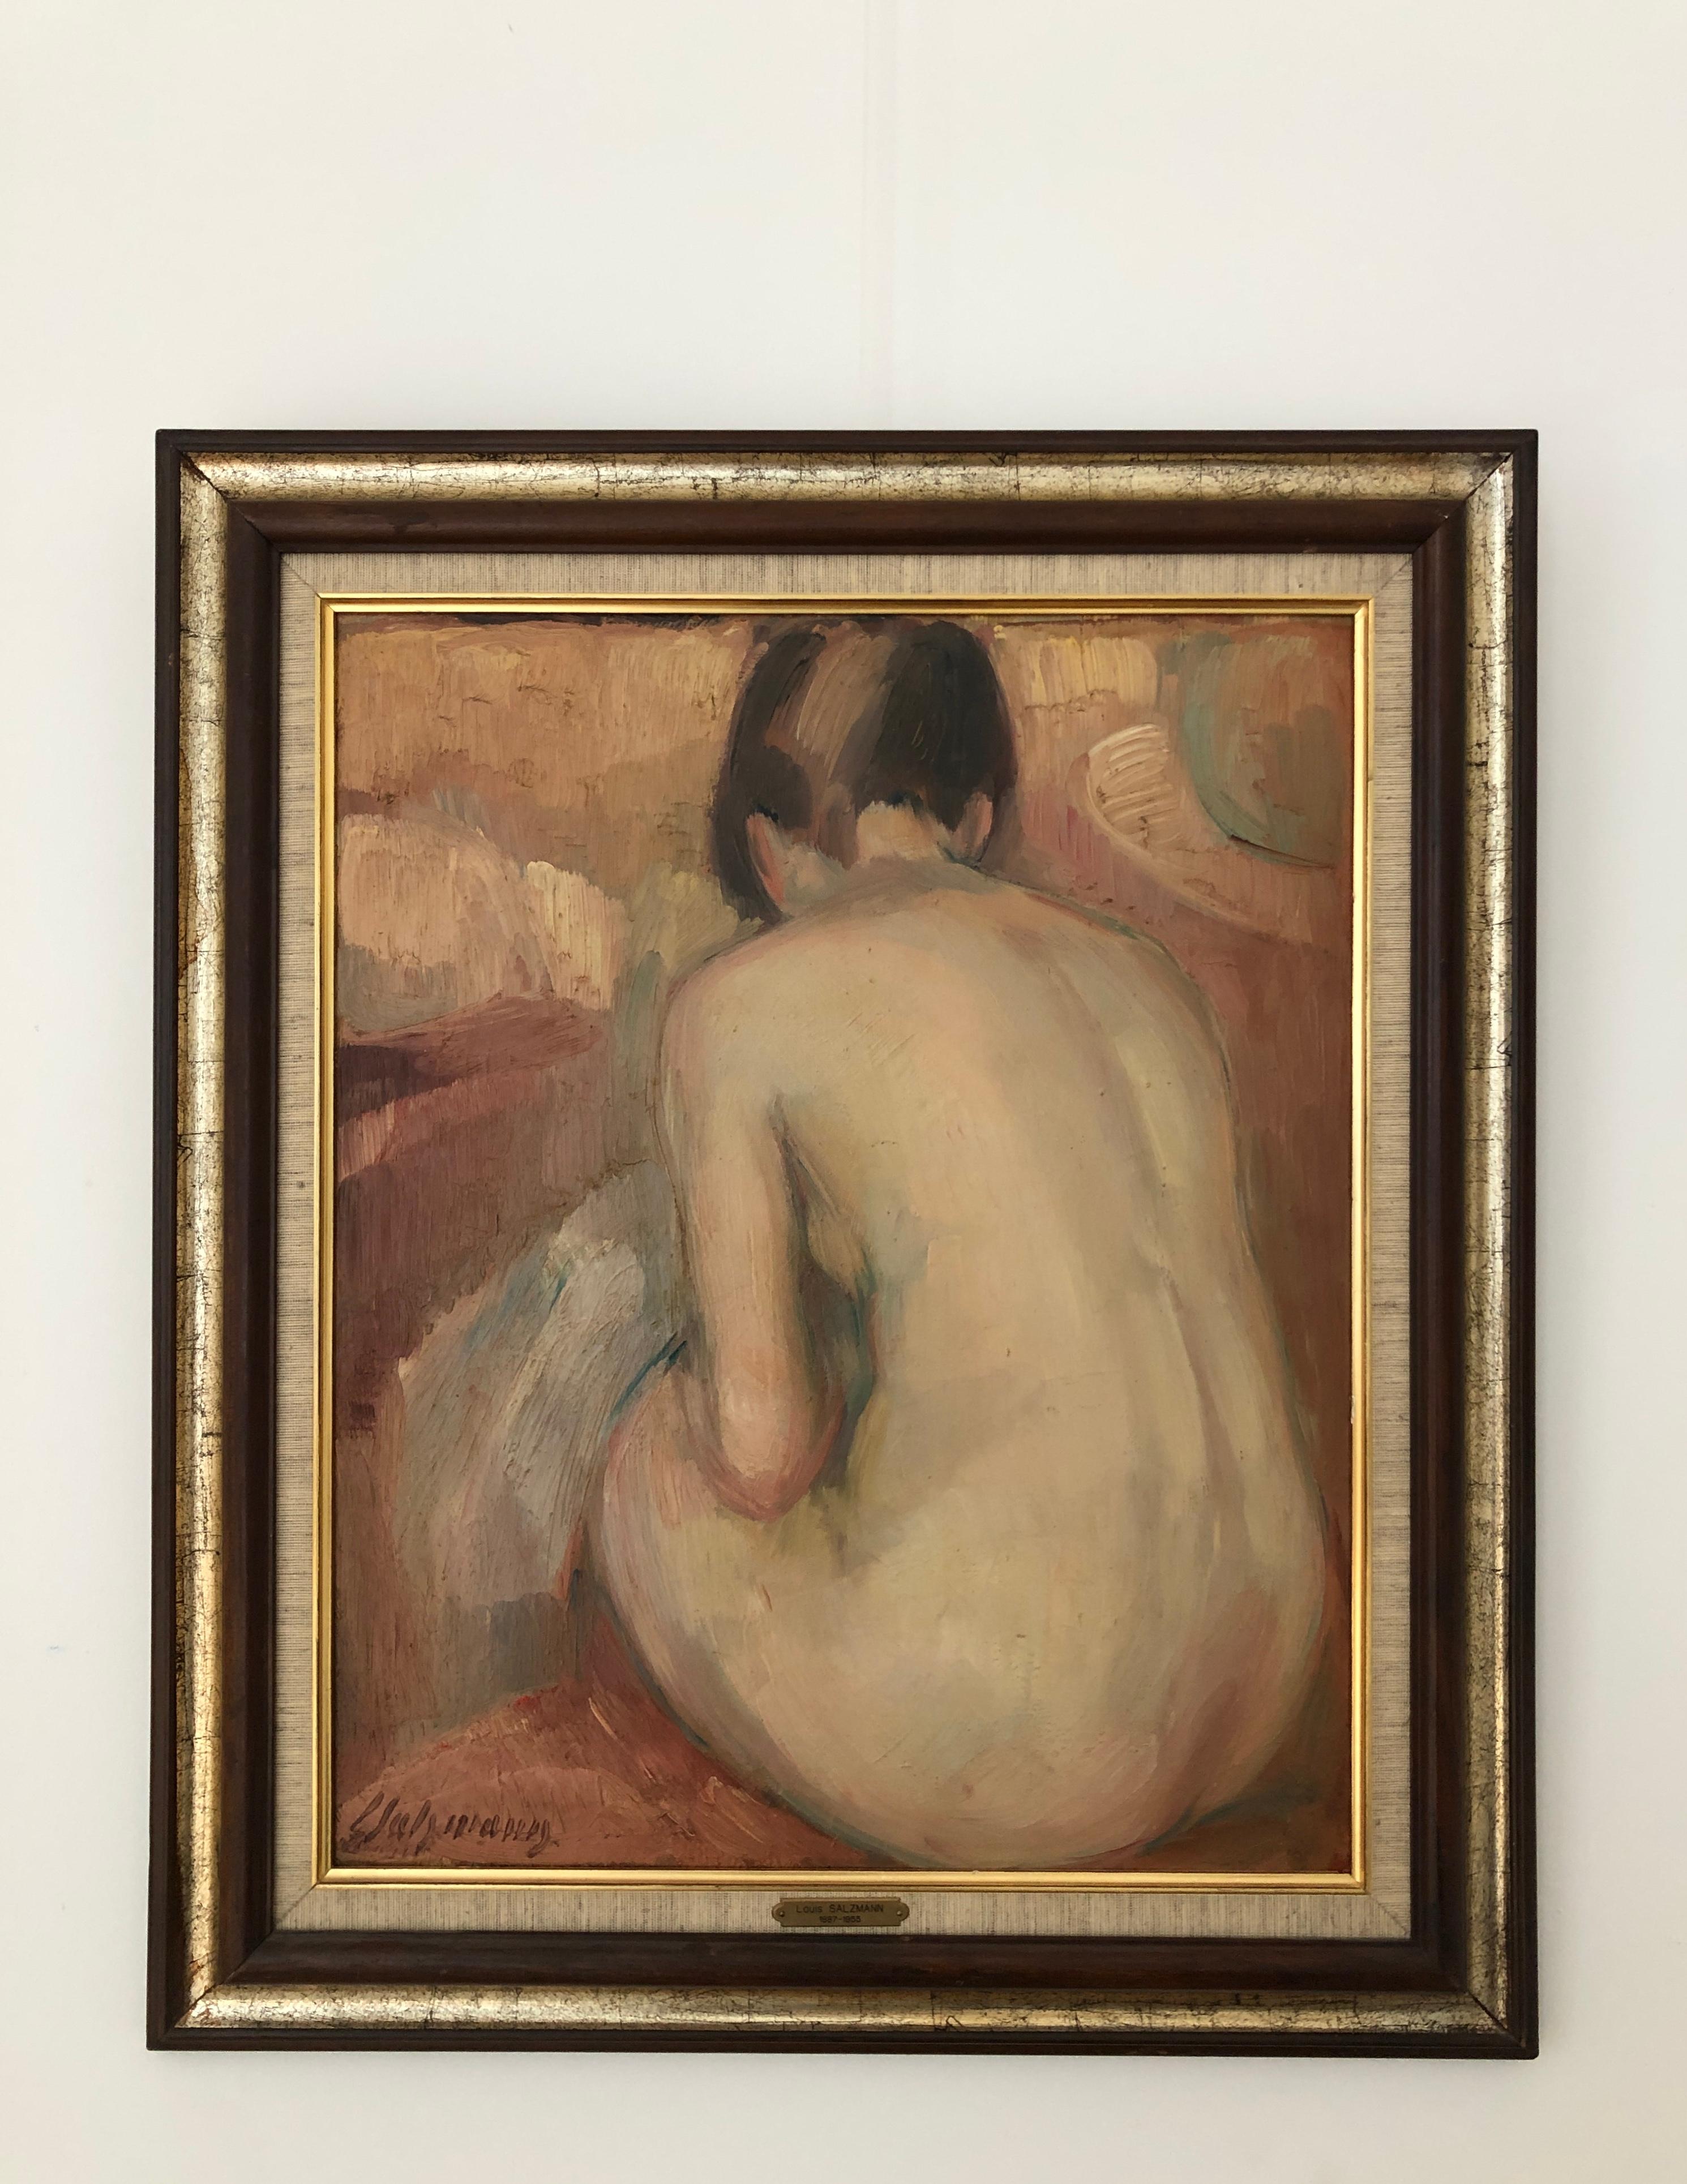 Back of seated naked woman - Painting by Louis Henri Salzmann